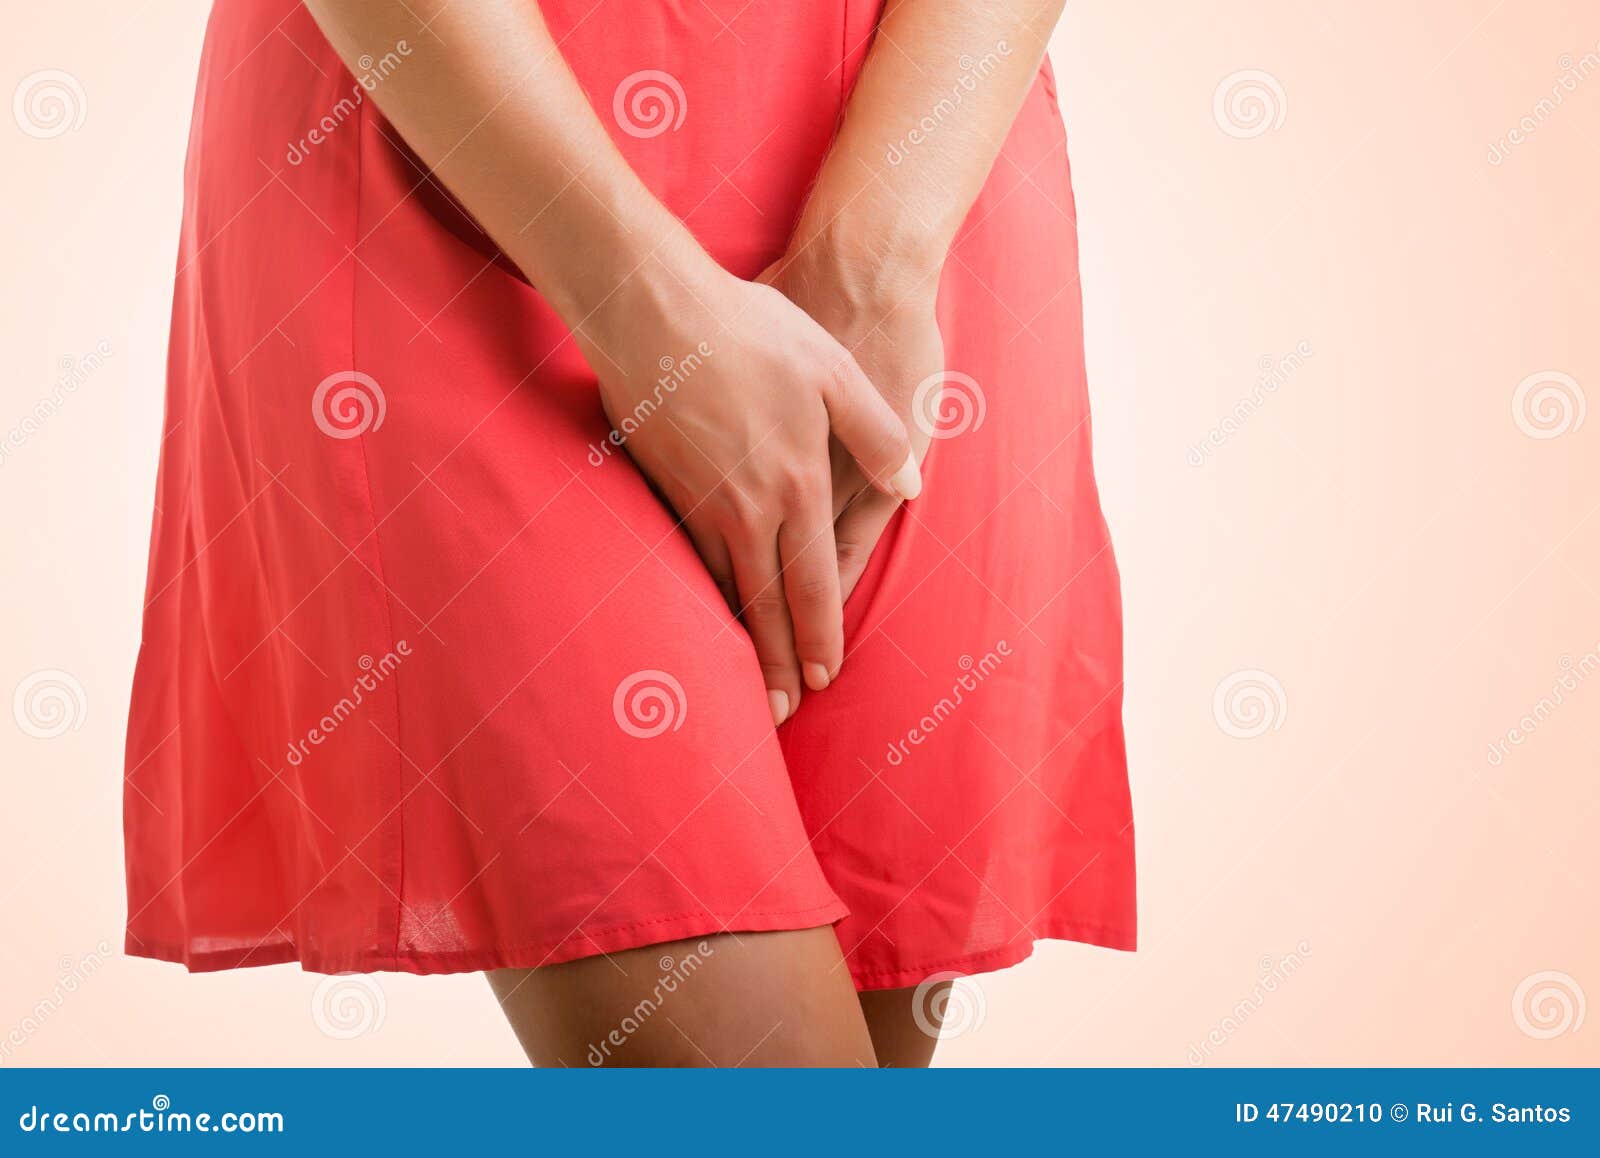 Woman Hands Touching Her Crotch Stock Photo